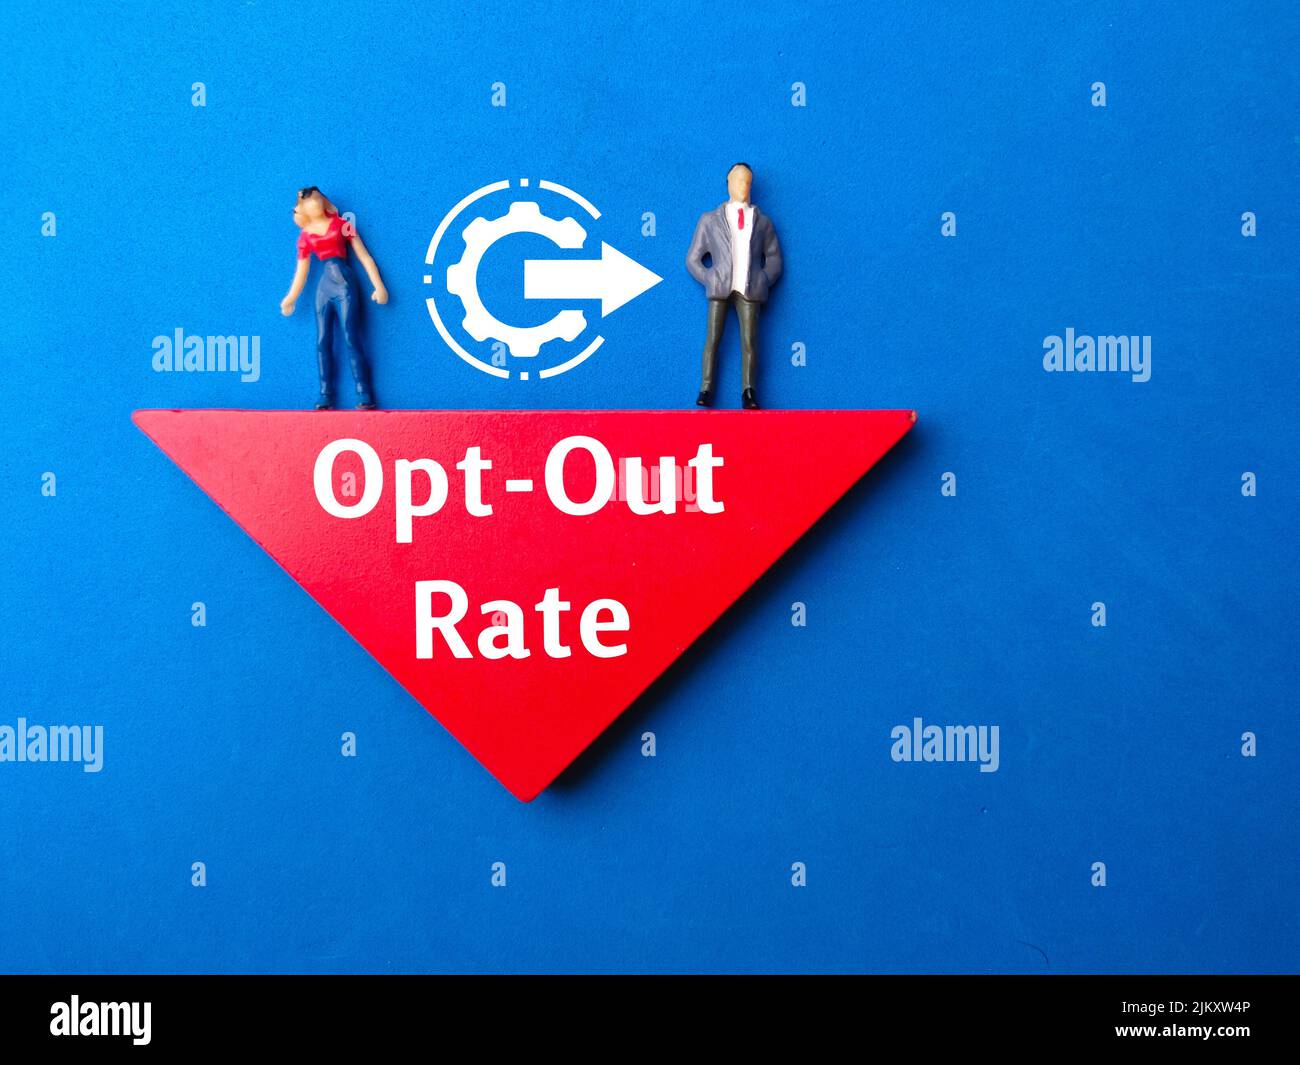 Miniature people and icon with text Opt-Out Rate on blue background. Stock Photo